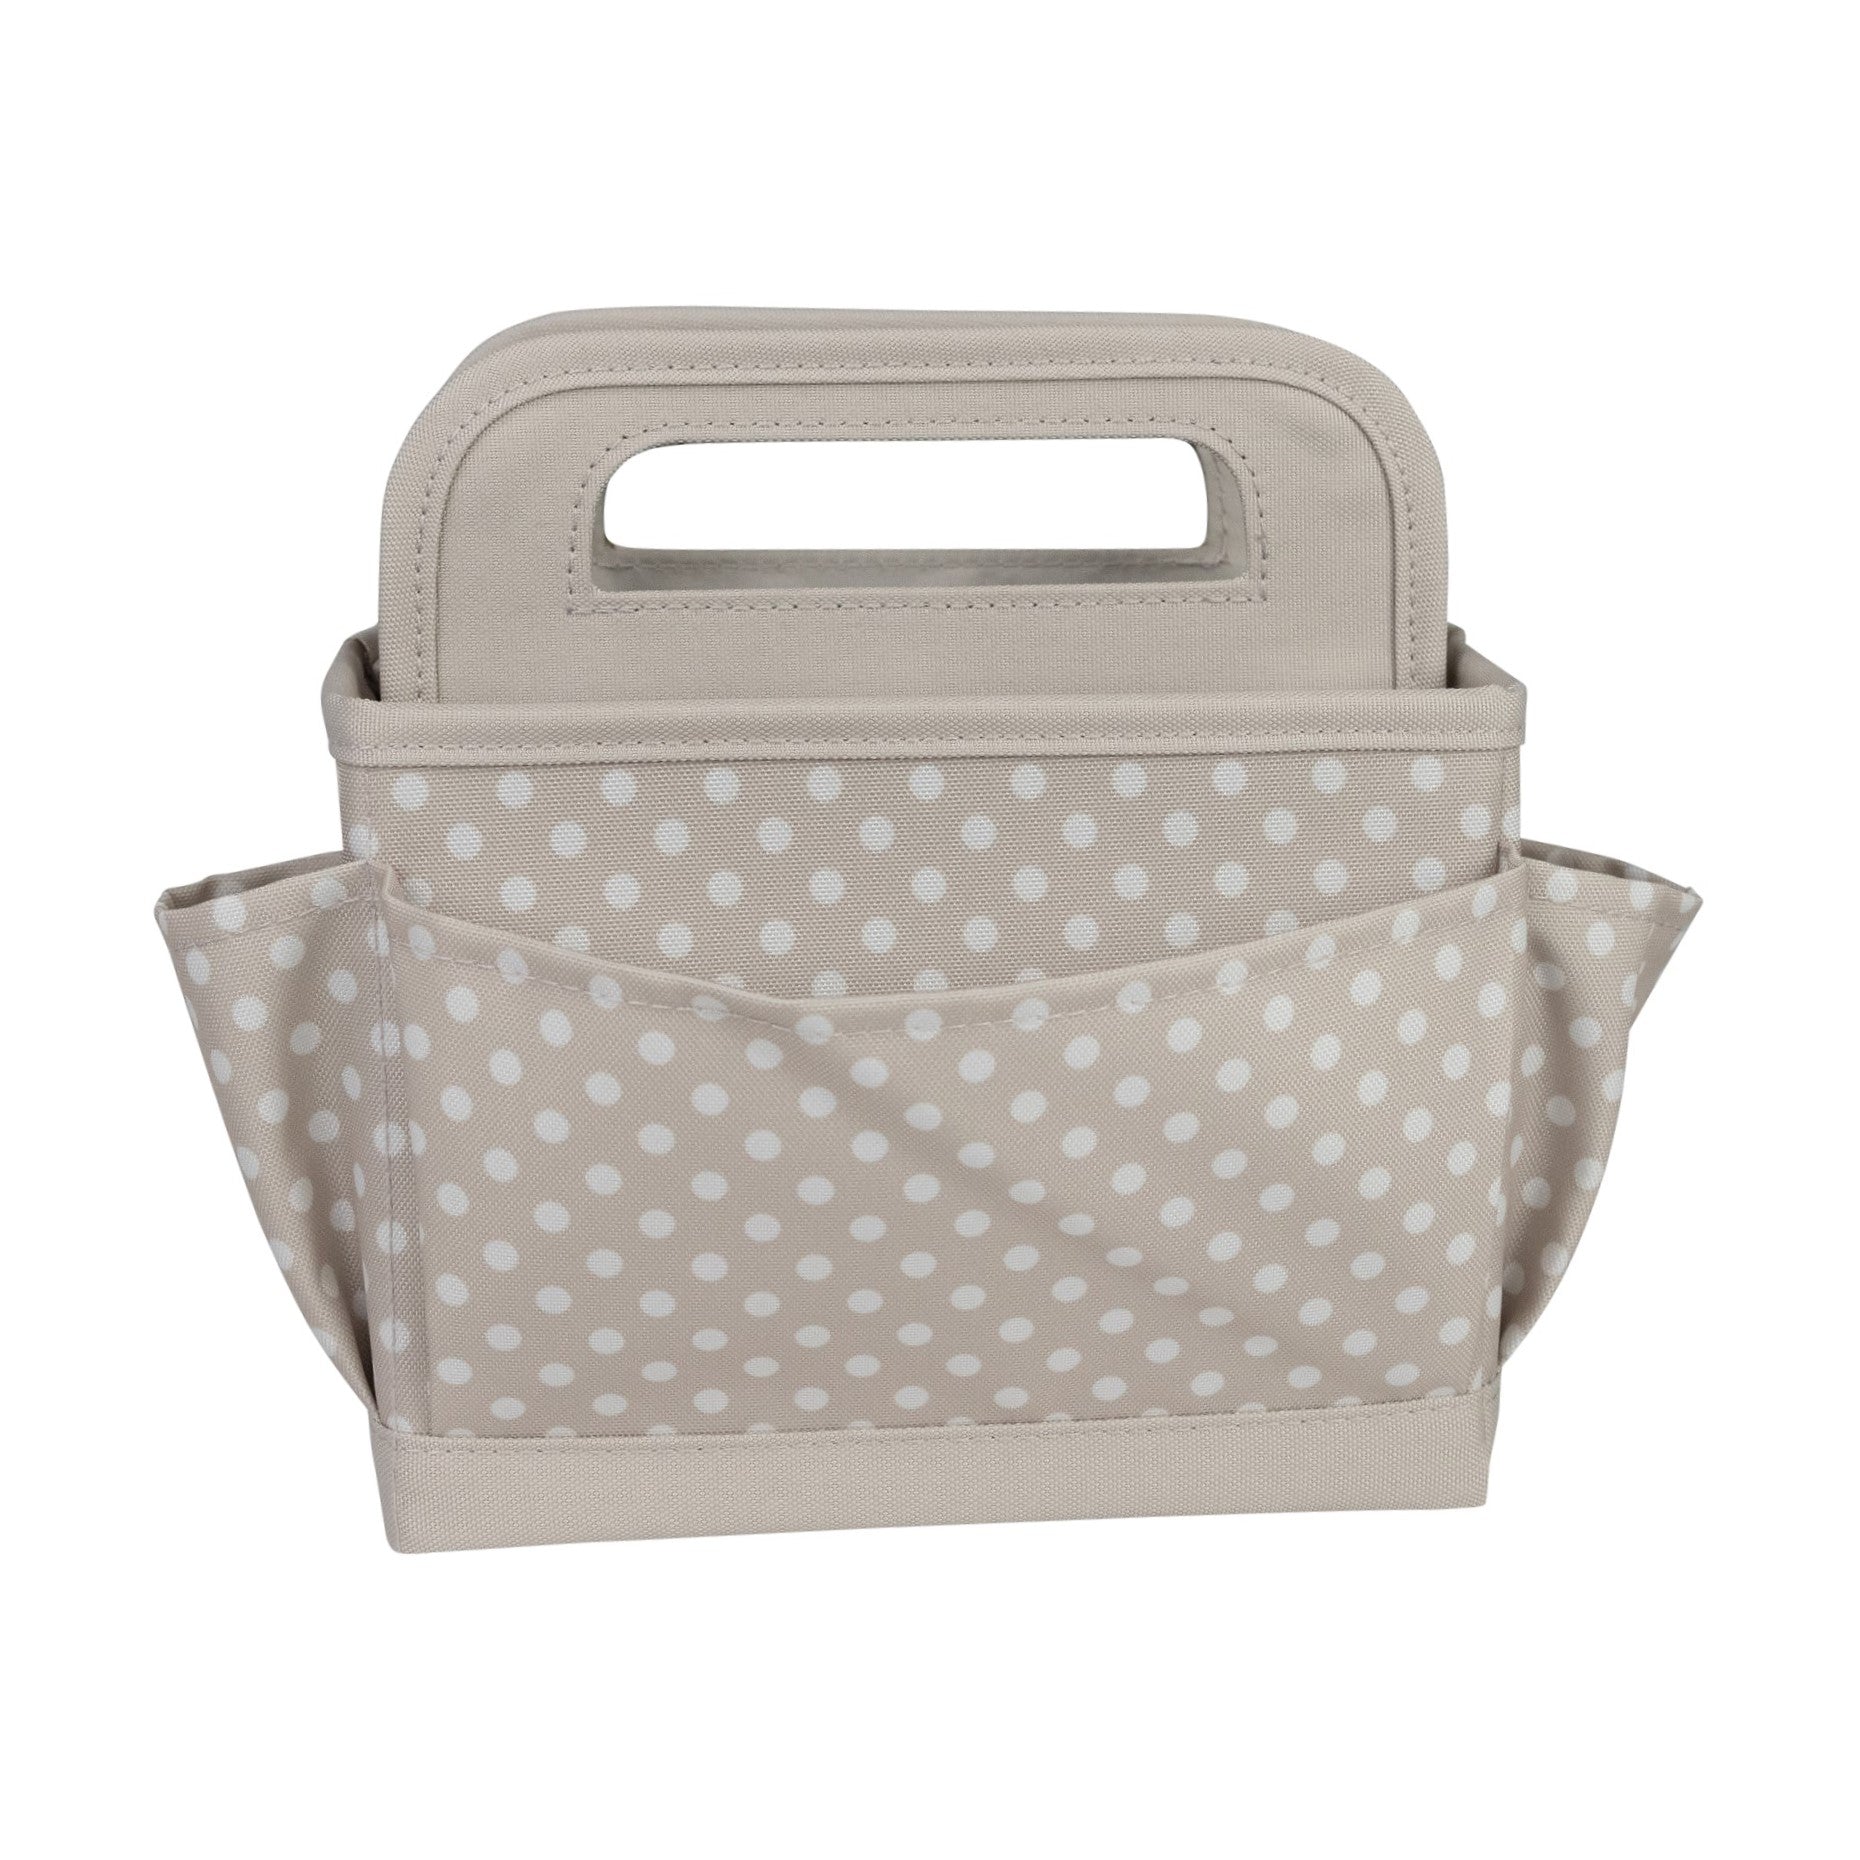 Collapsible Desktop Craft Caddy, Grey Heather - Everything Mary